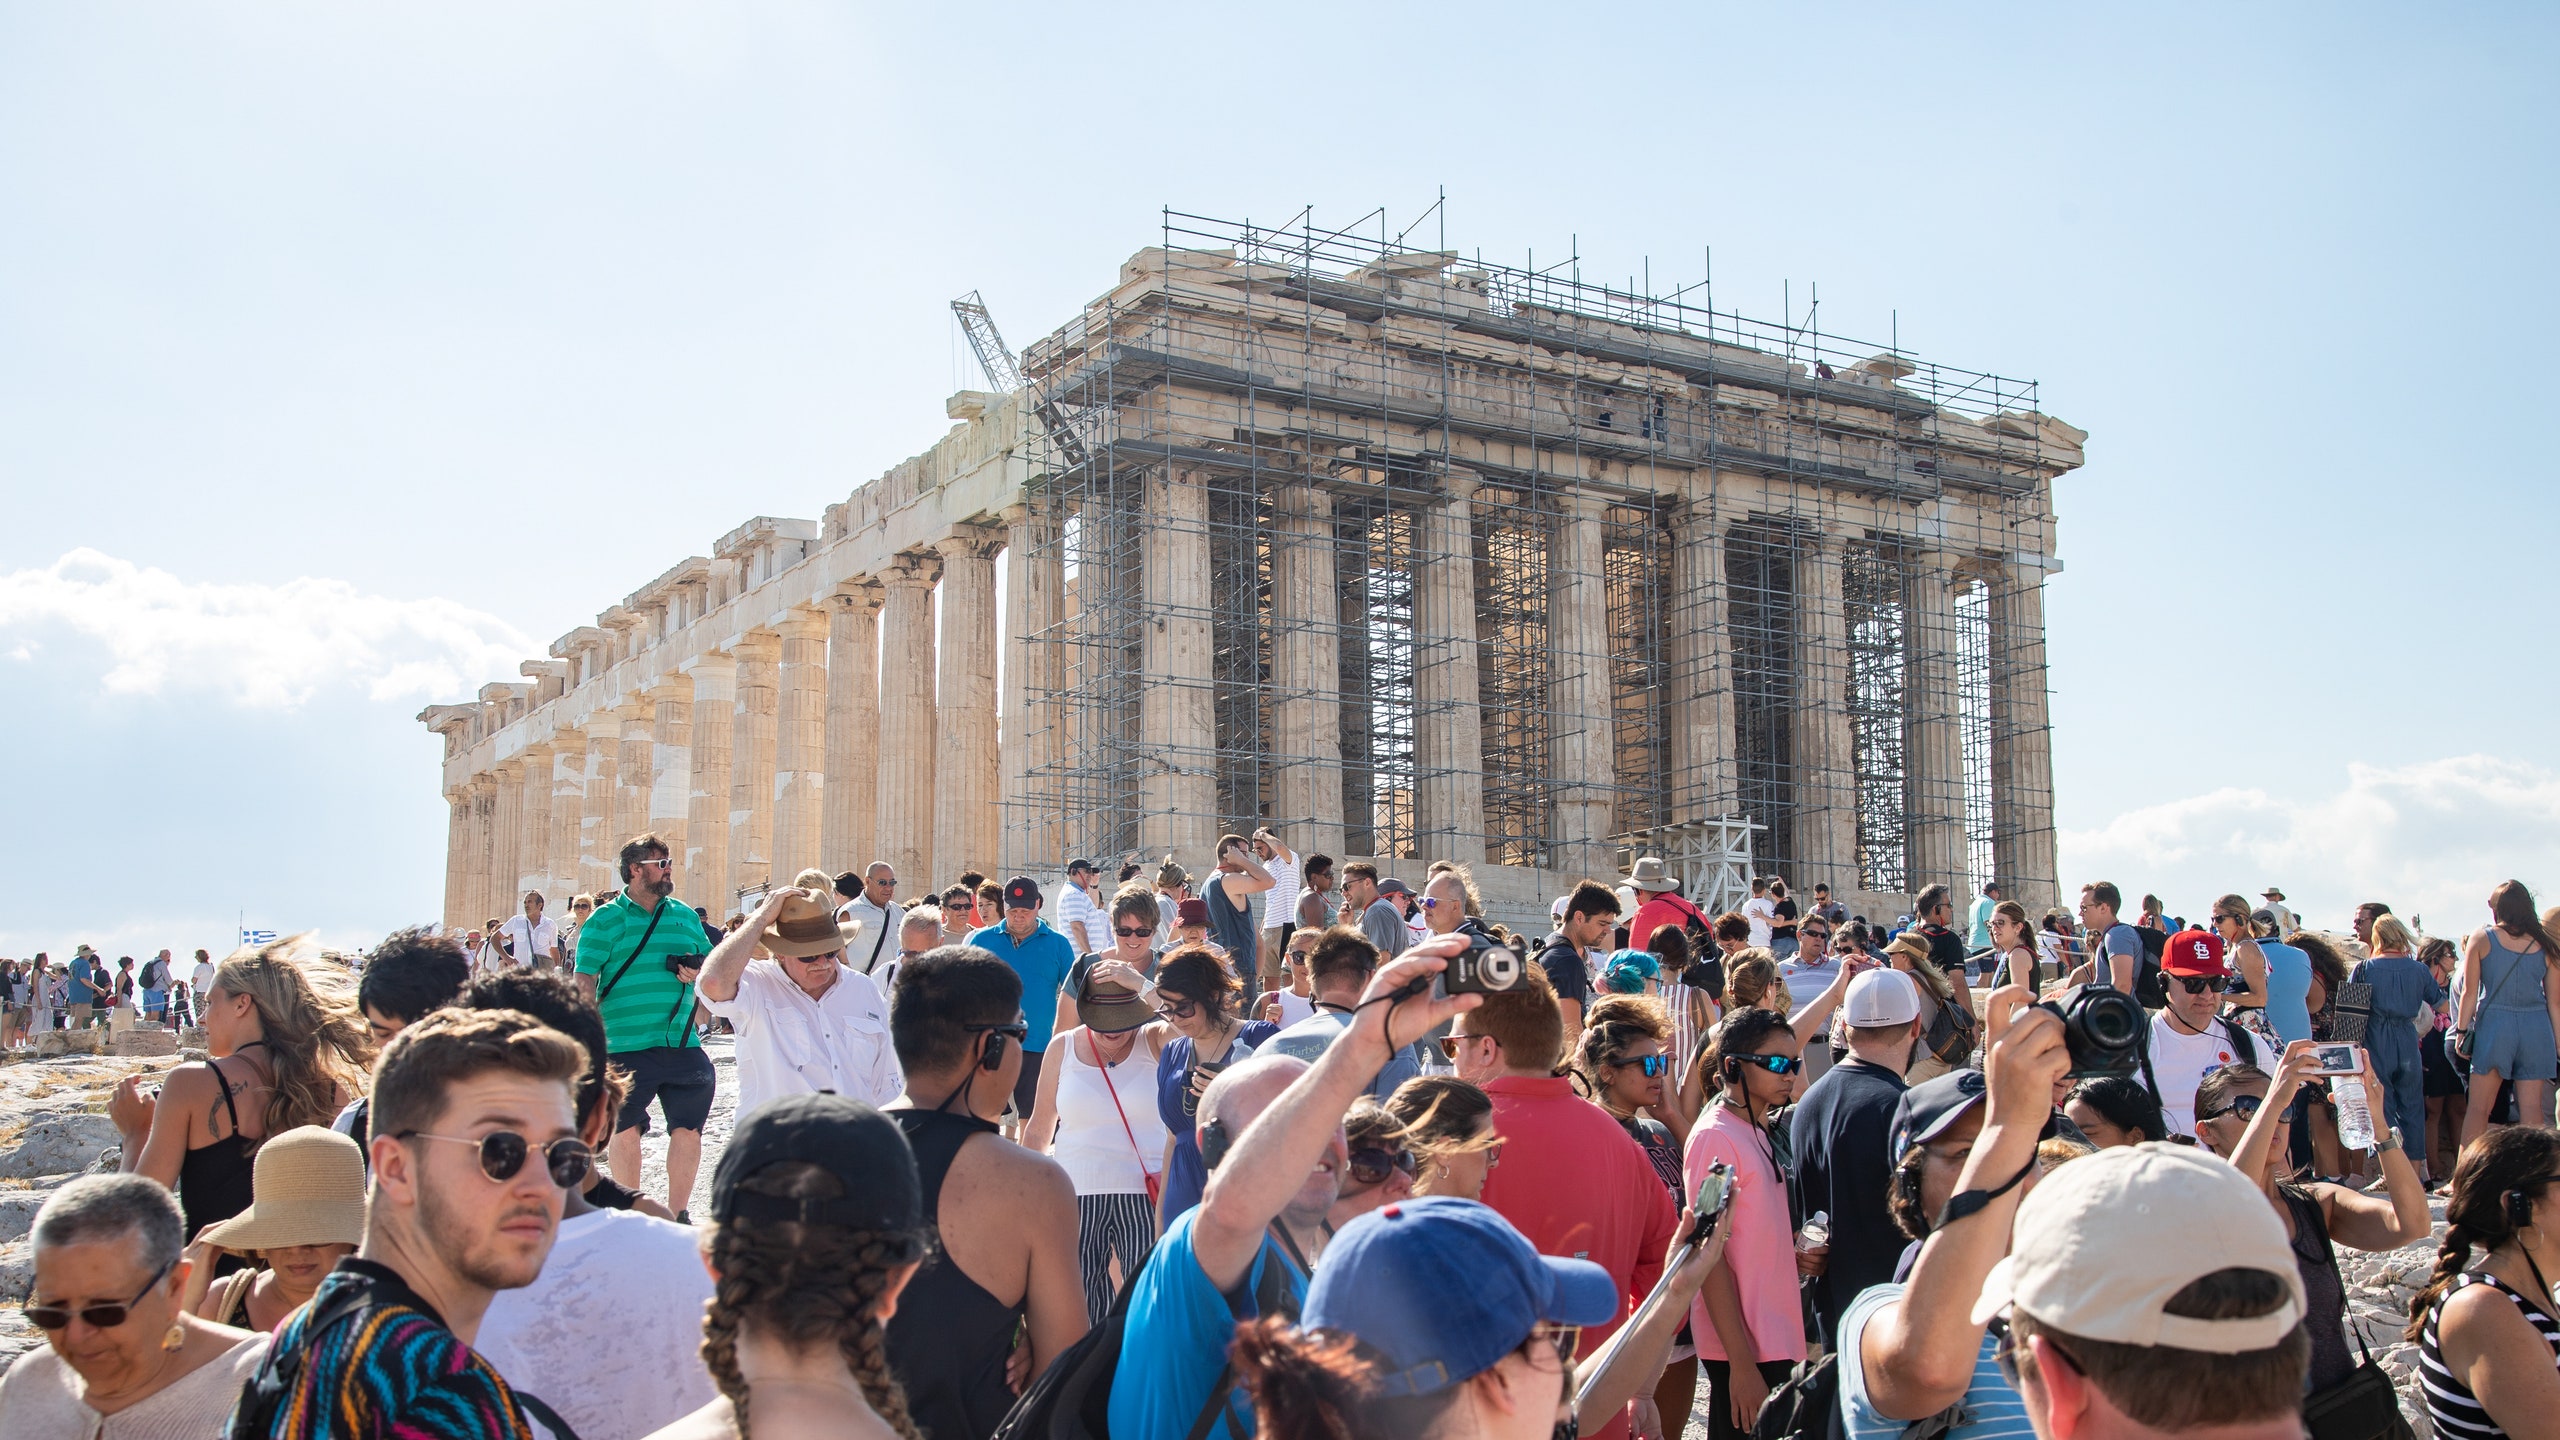 Crowd of tourists surrounding the Acropolis in Athens